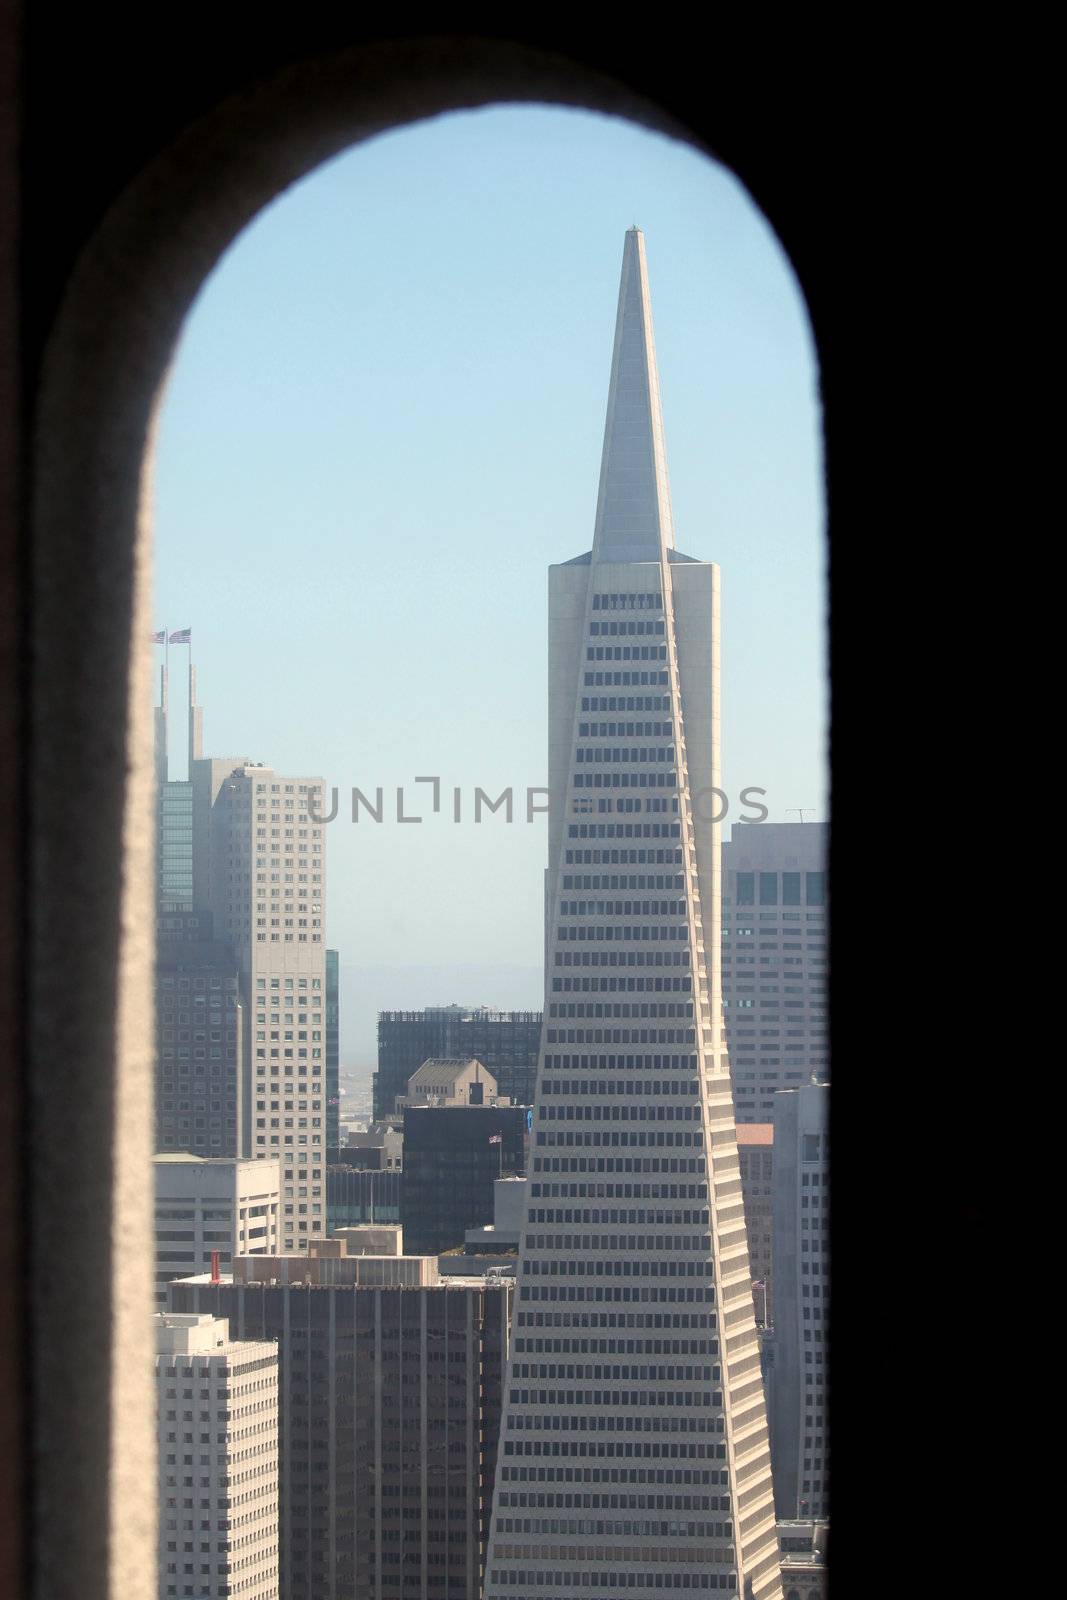 View of the Transamerica Pyramid Building in San Francisco